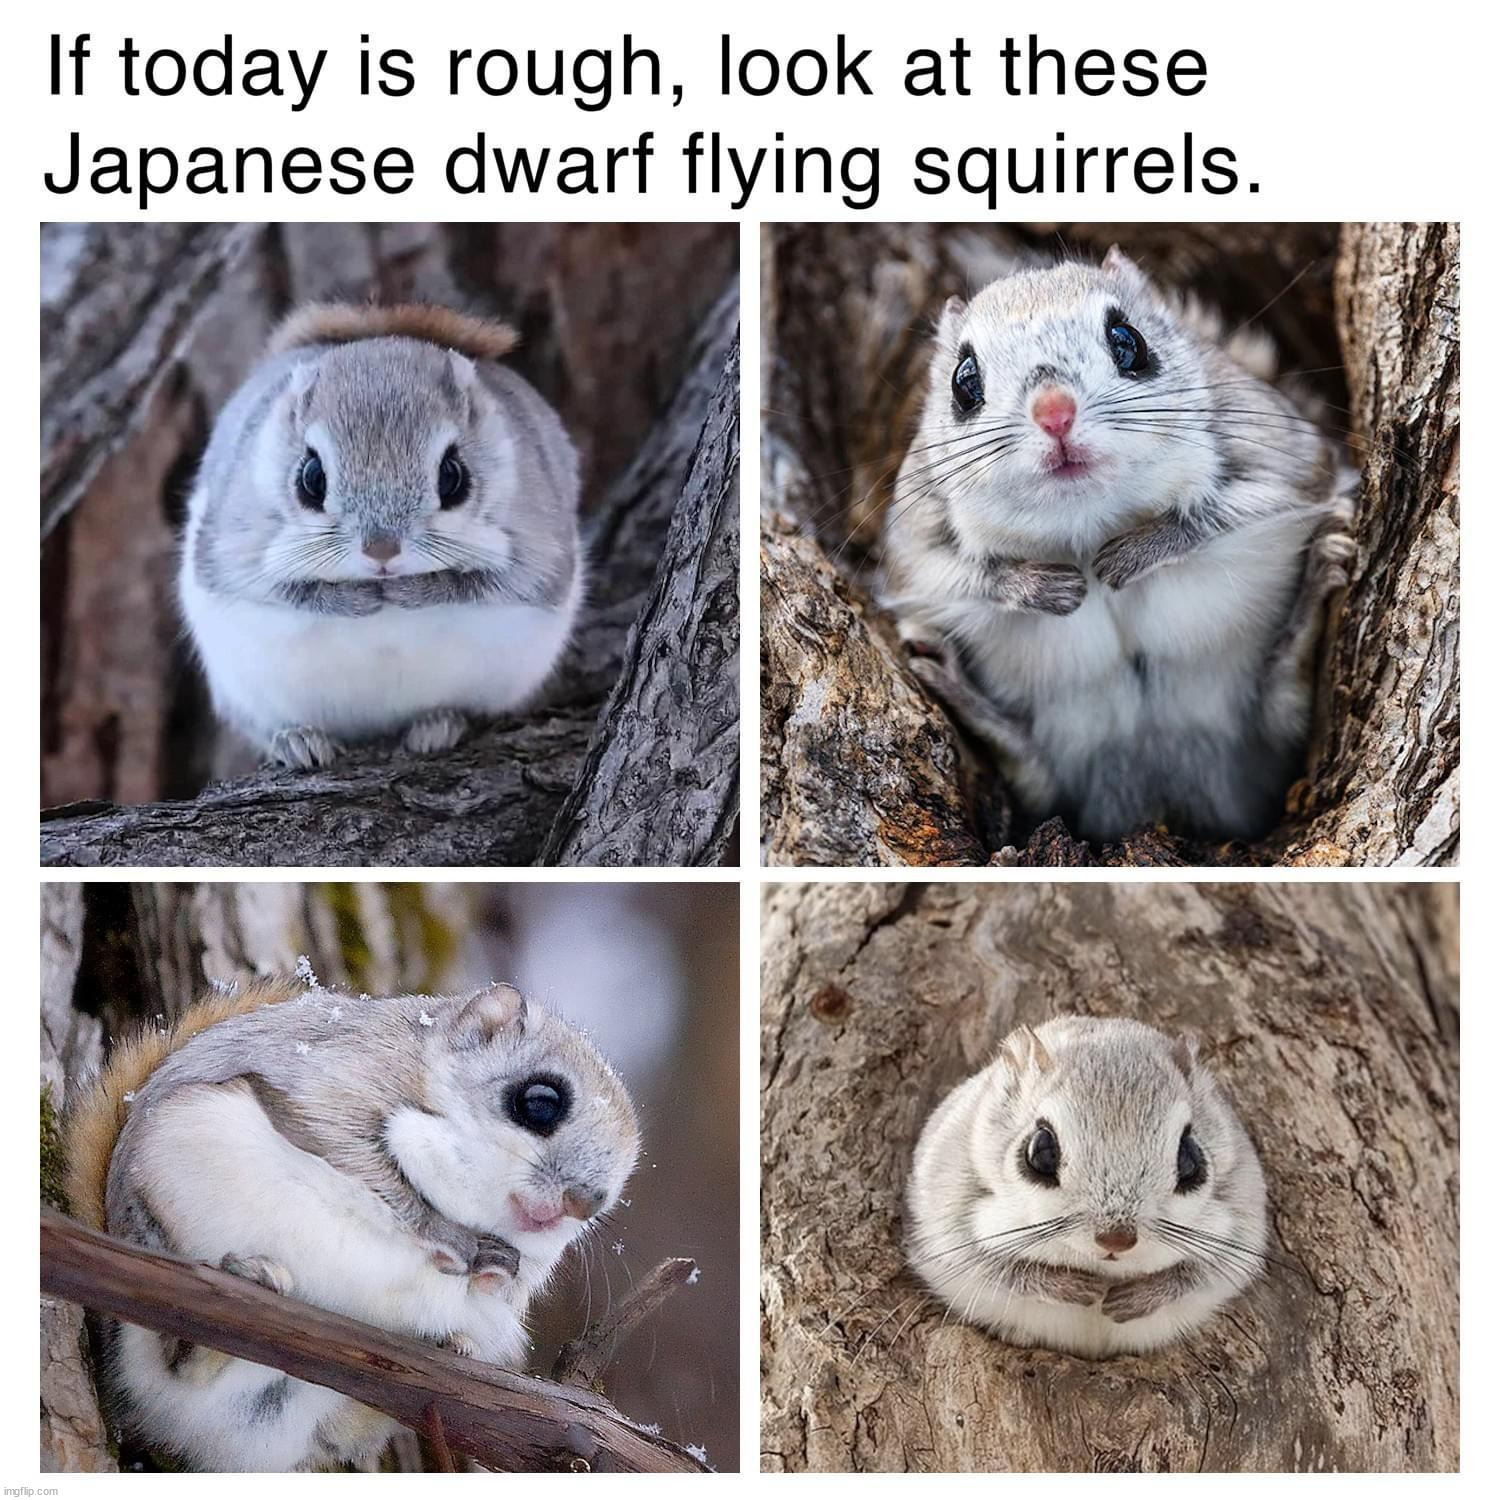 (mod note: Aww!) | image tagged in wholesome | made w/ Imgflip meme maker